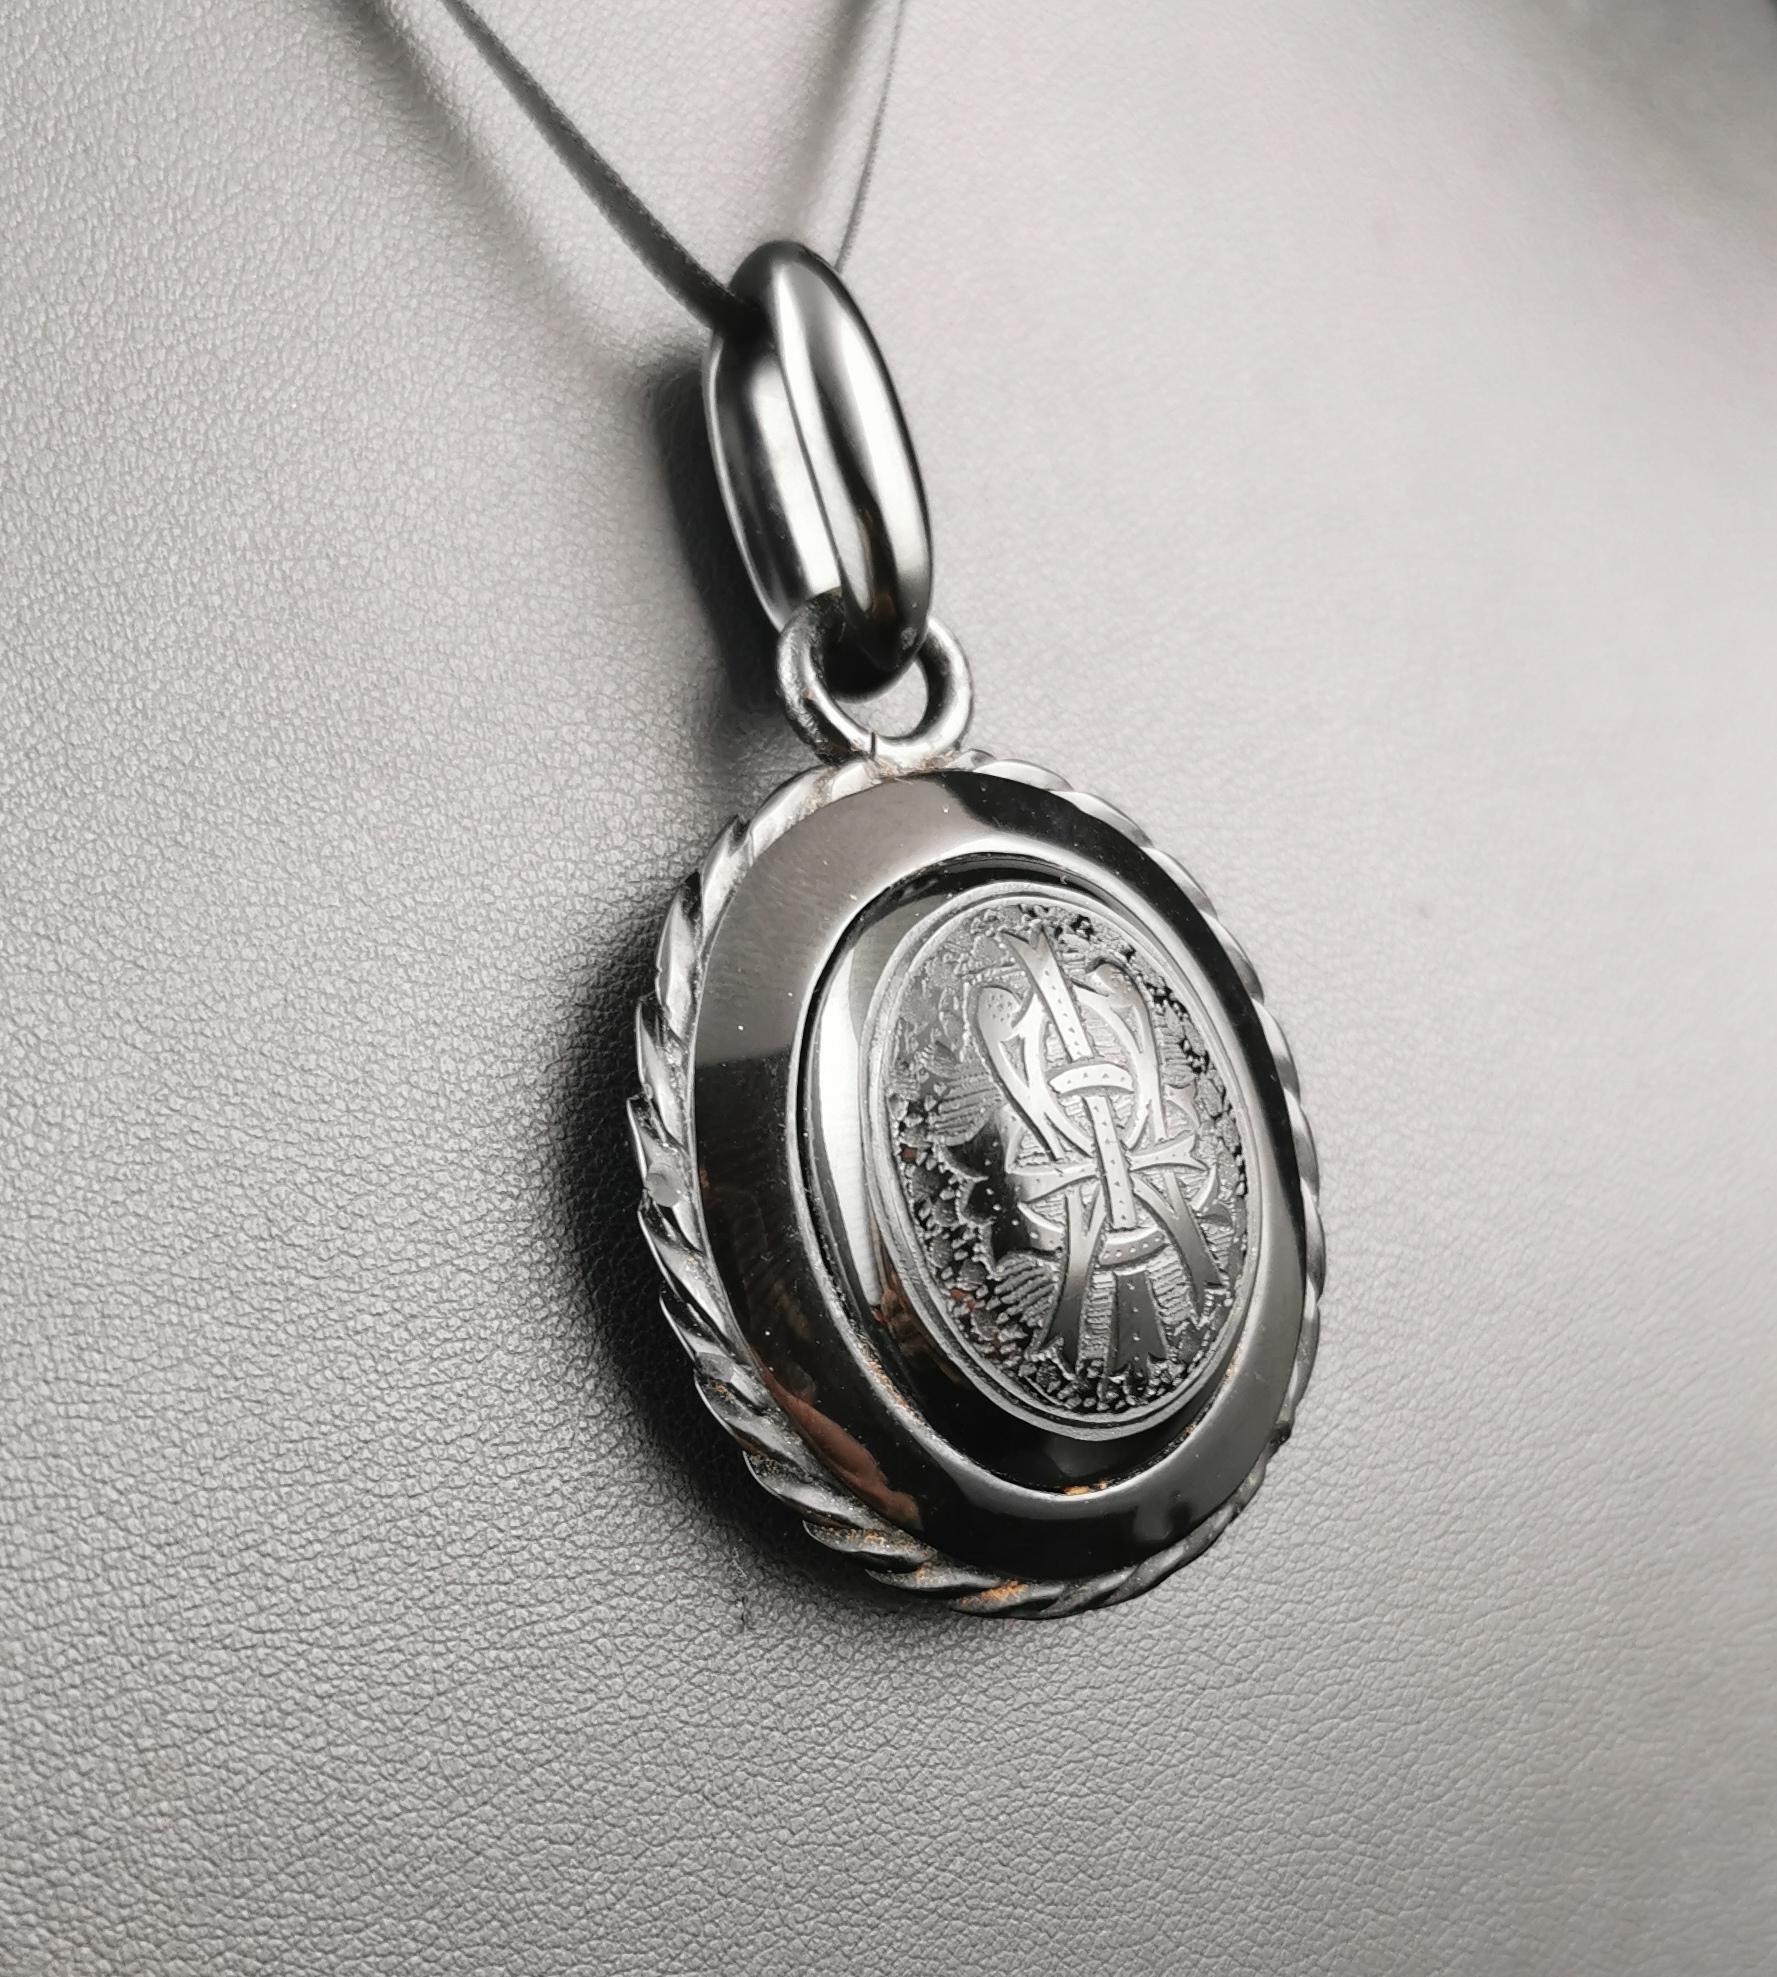 A beautiful antique Victorian era mourning locket.

It is finely hand carved from inky black Whitby Jet, domed at the front with the engraved letters AEI which stand for Amity Eternity Infinity.

This was a popular motif in Victorian jewellery in